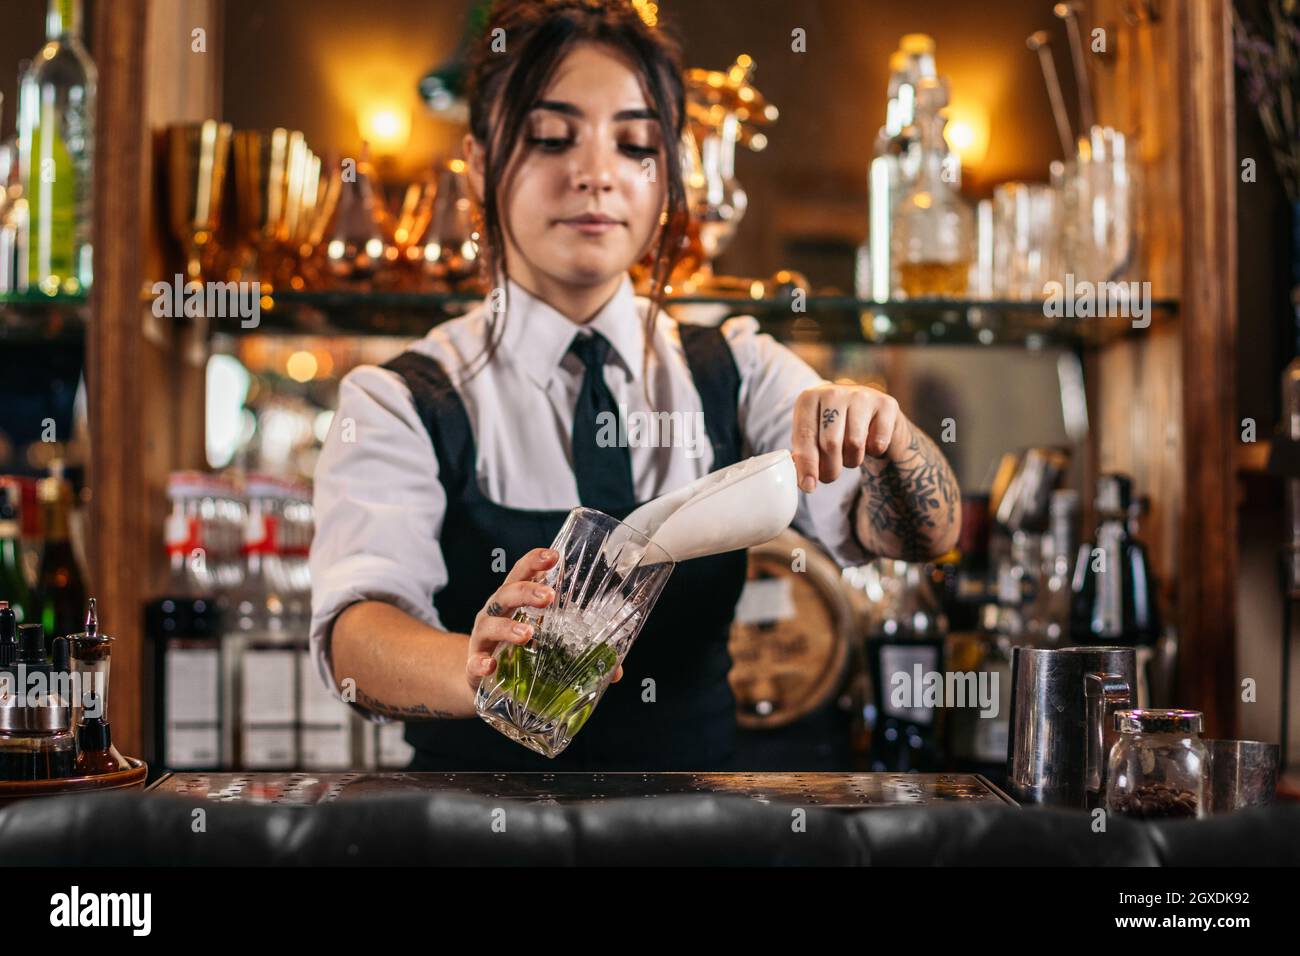 Concentrated female bartender in uniform pouring ice into glass while  working at counter in bar Stock Photo - Alamy